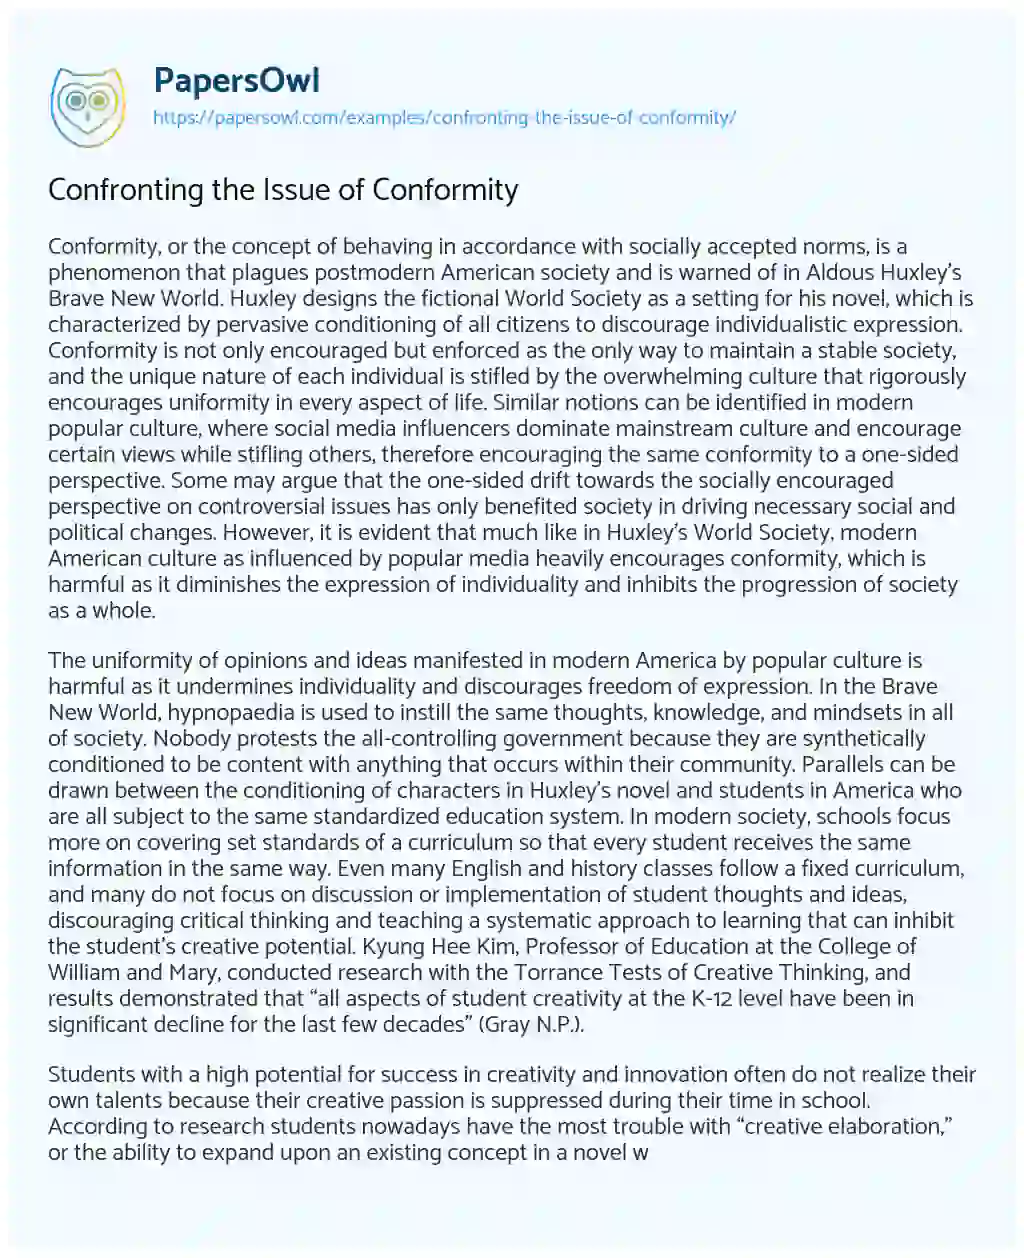 Essay on Confronting the Issue of Conformity